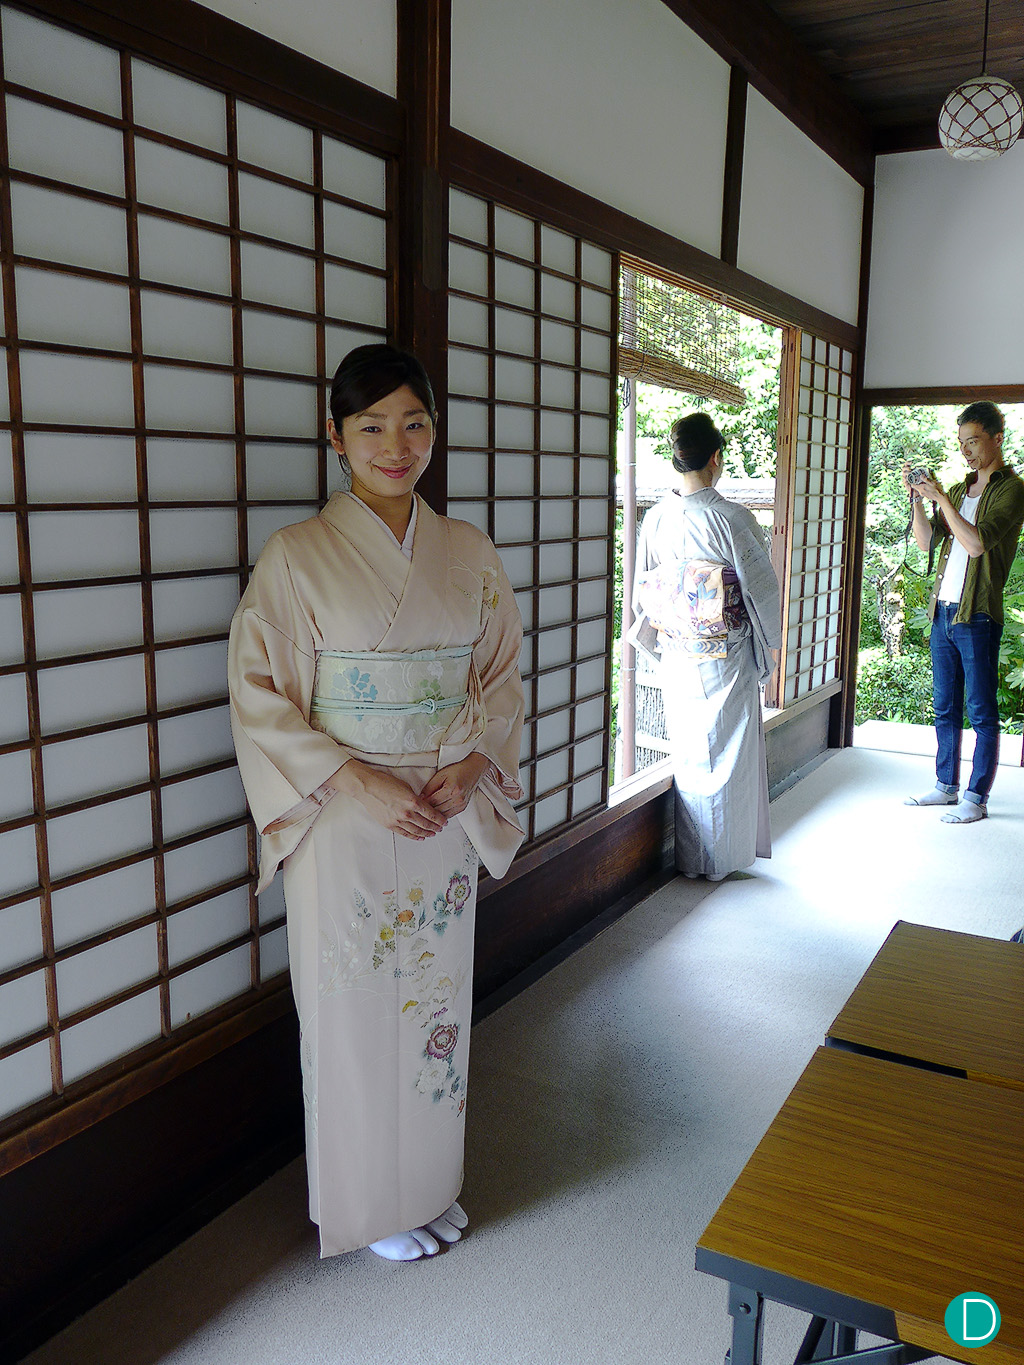 The Ikebana was held in one of the rooms at Taizo-in. The Japanese screens separating the rooms were made some 500 years ago, and still functional today. These kimono clad ladies were our tutors. The class was taught by a 4th generation Ikebana master.